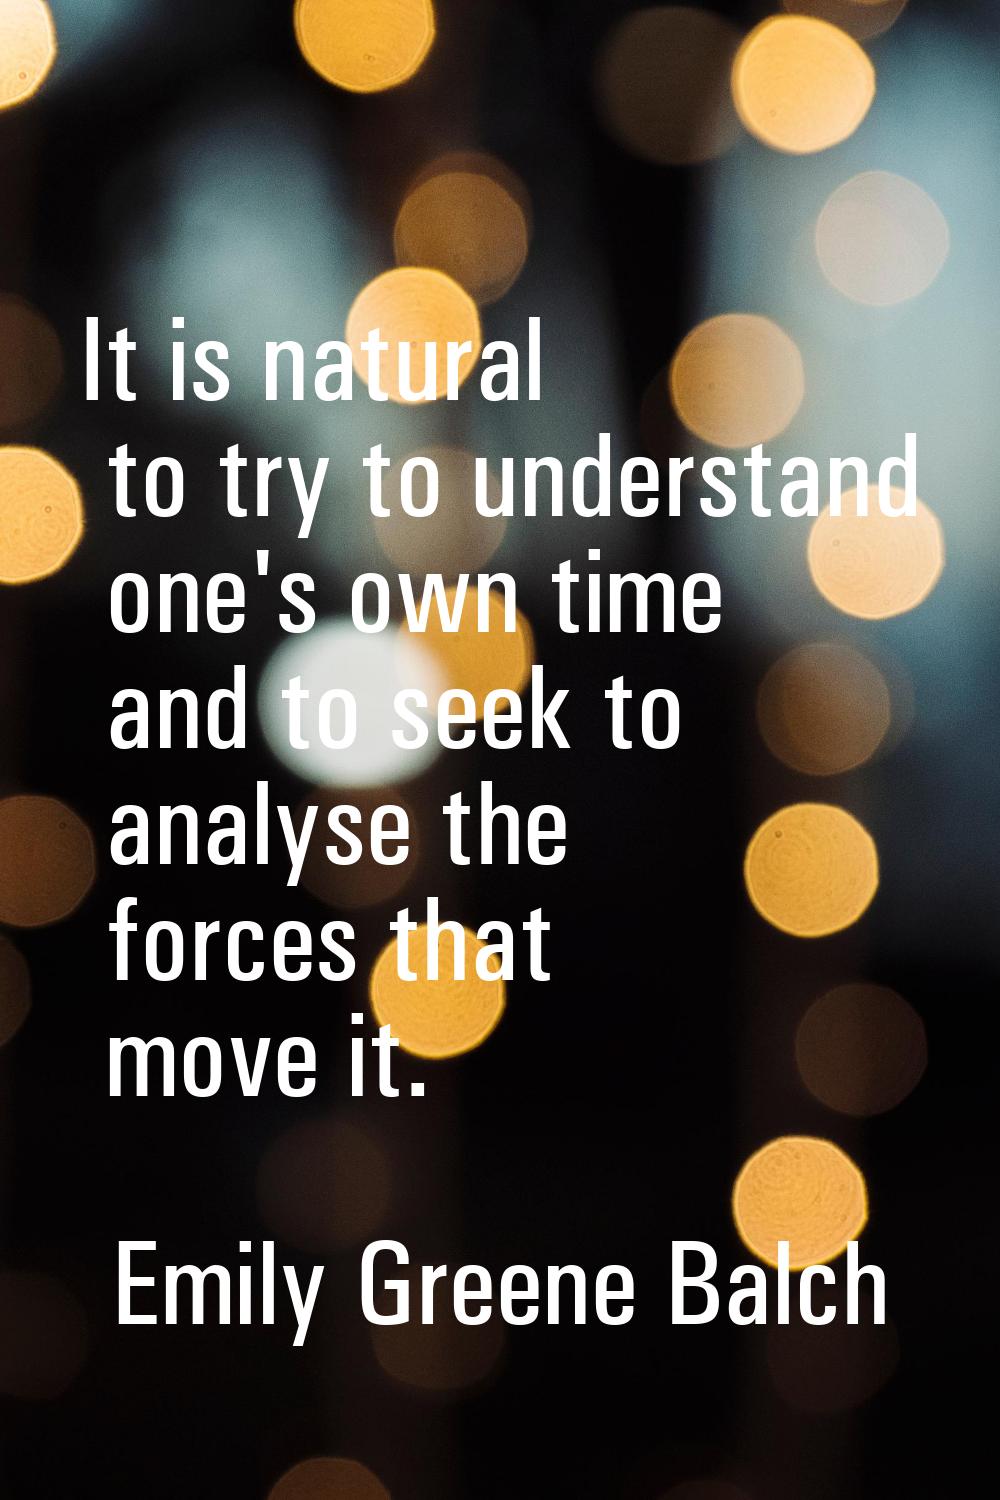 It is natural to try to understand one's own time and to seek to analyse the forces that move it.